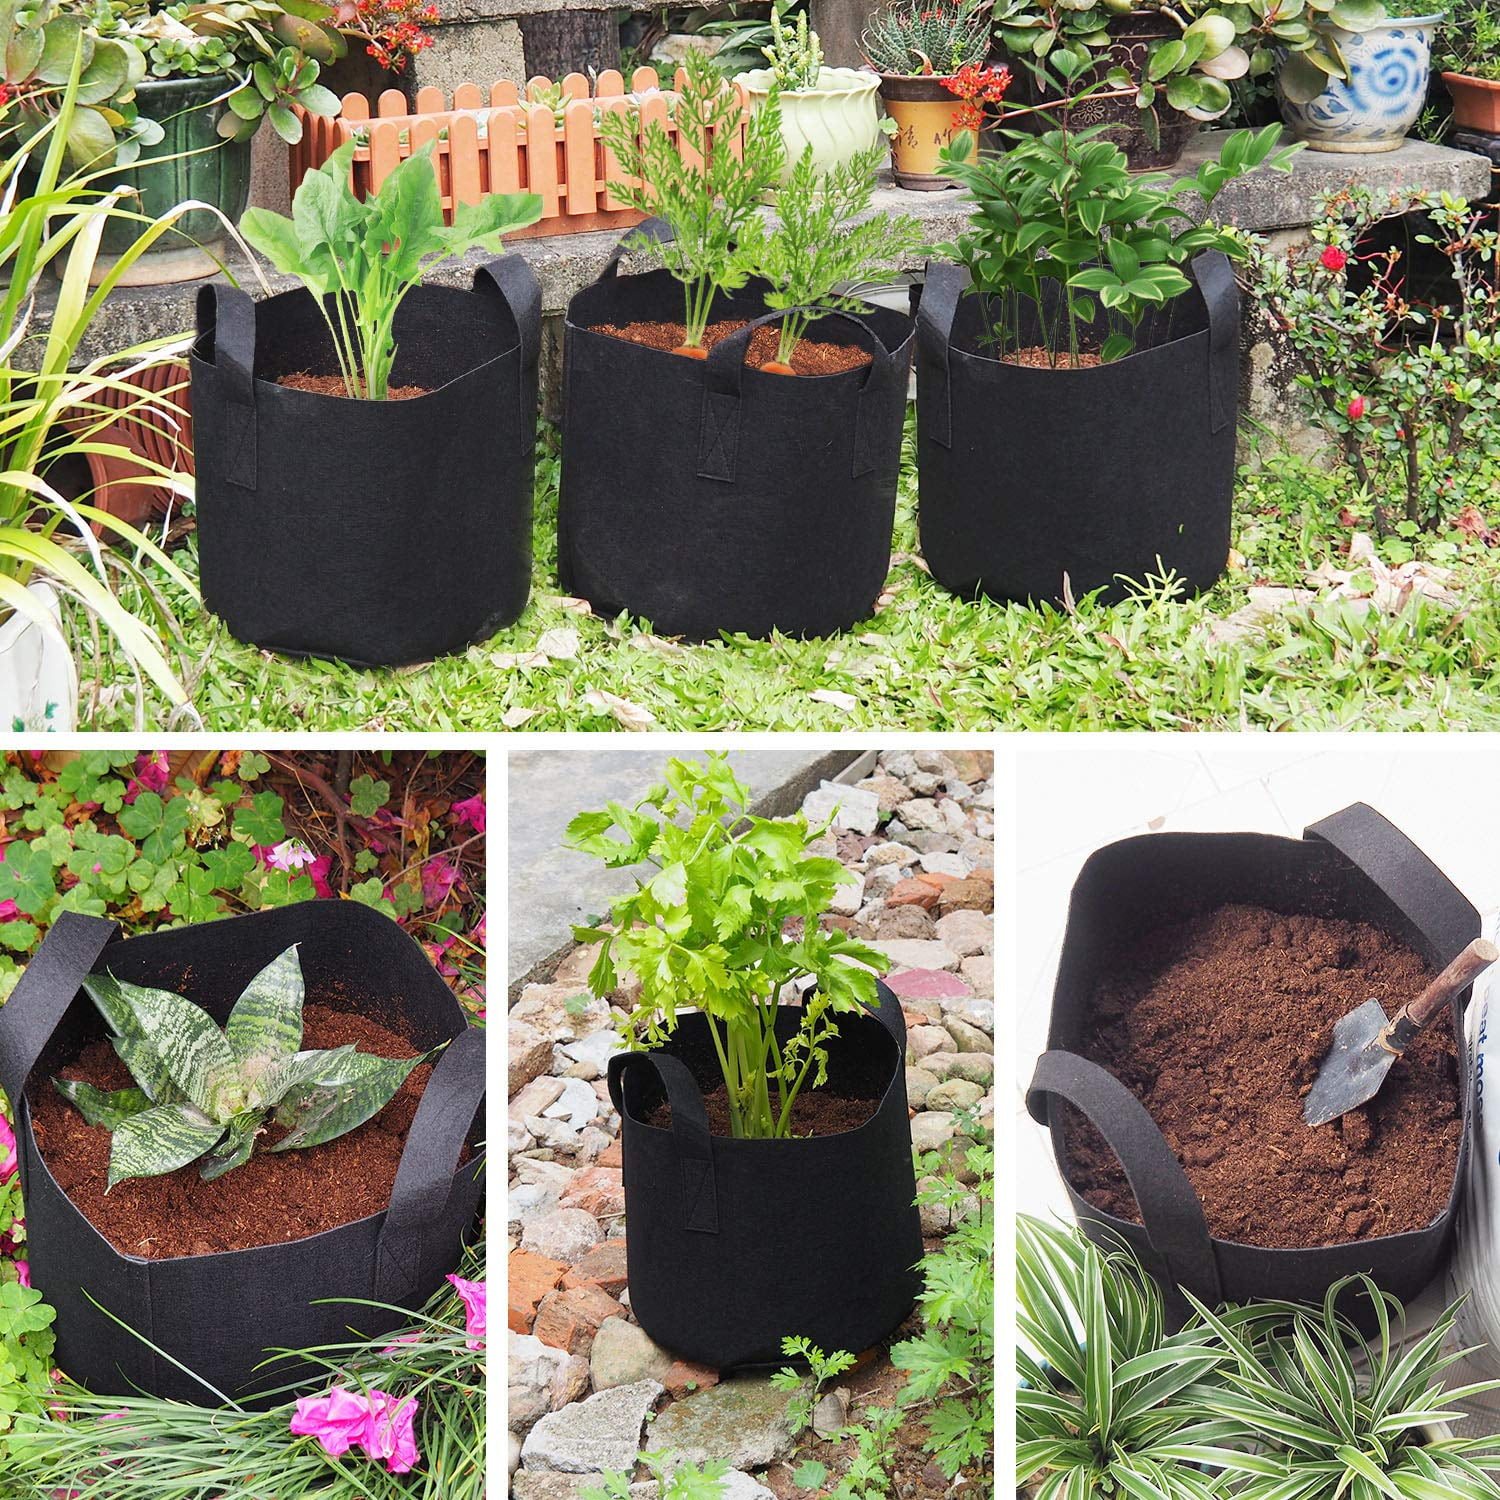 Aeration Fabric Pots with Durable Details about   PHYEX 12-Pack 7 Gallon Nonwoven Grow Bags 